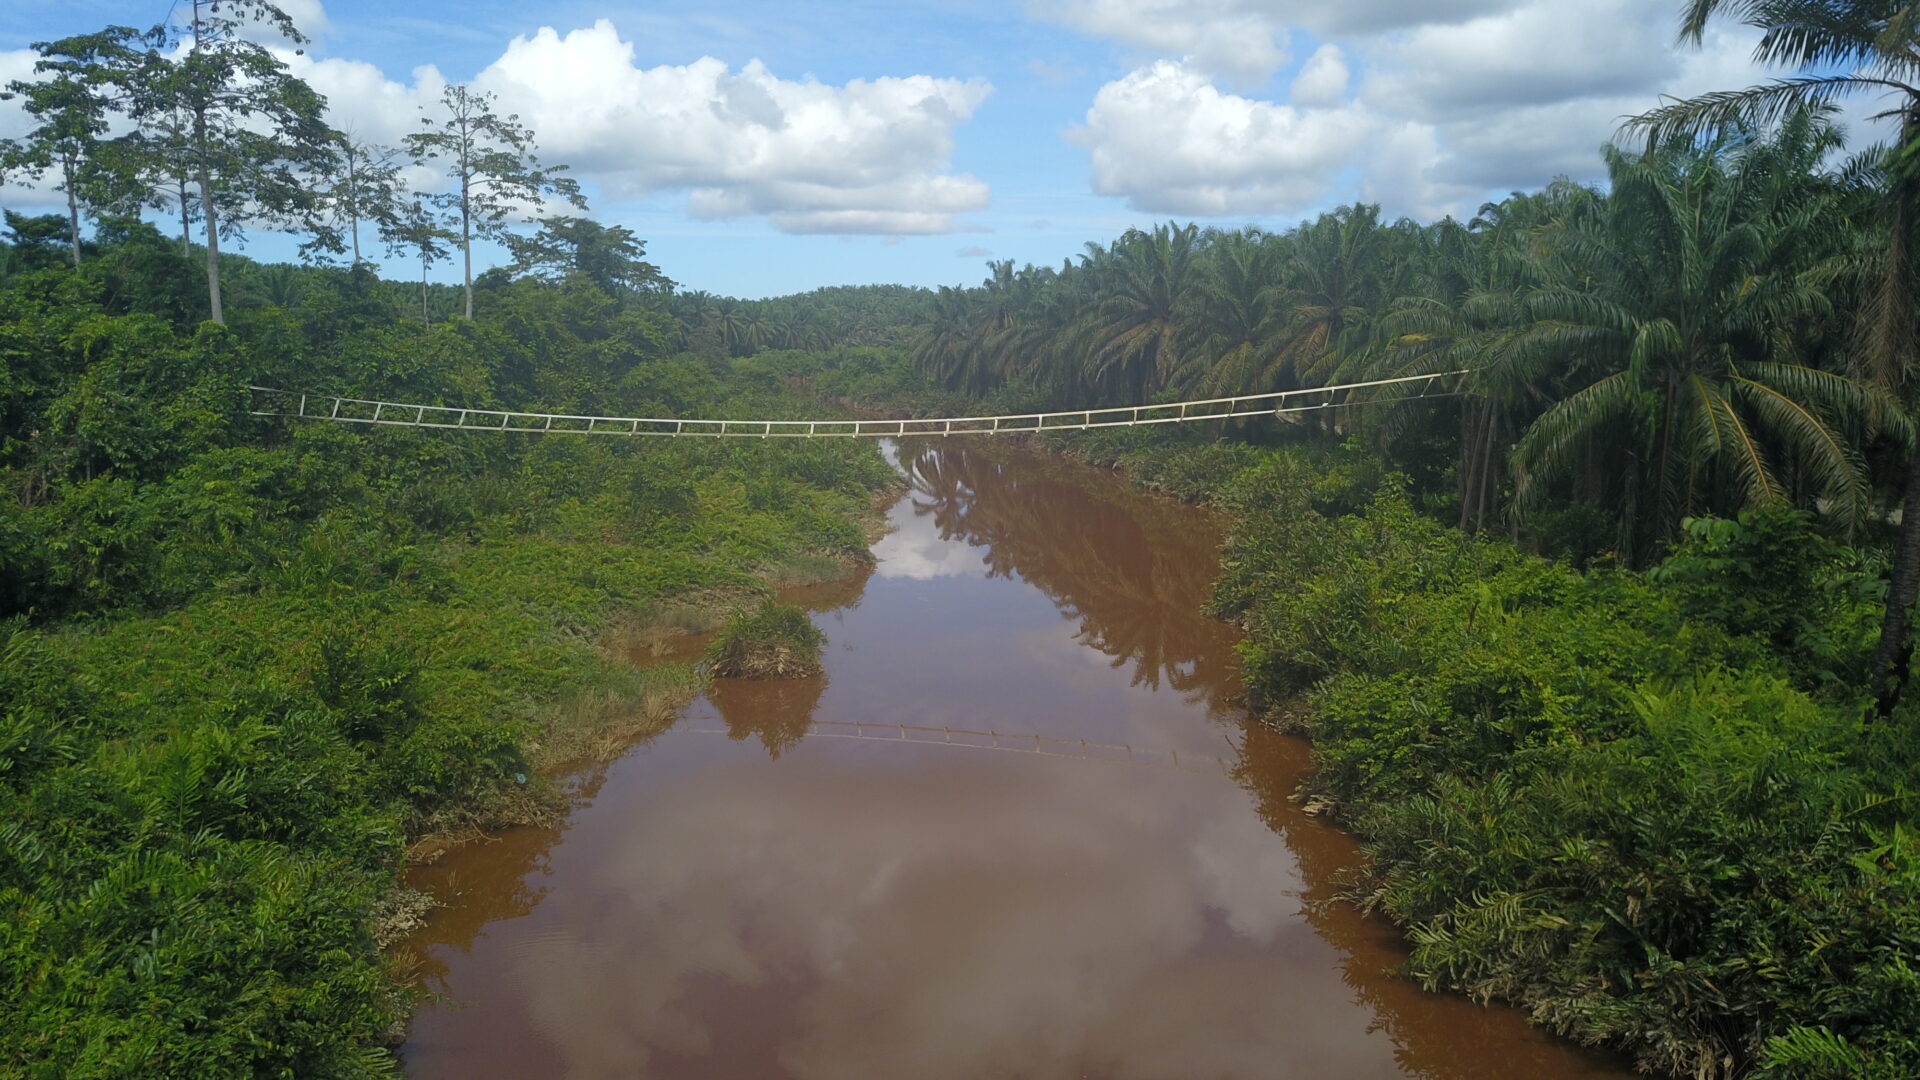 A photo of an example of HUTAN’s latest bridge design, showing a horizontal ladder structure between an oil palm plantation and forest. Credit: HUTAN